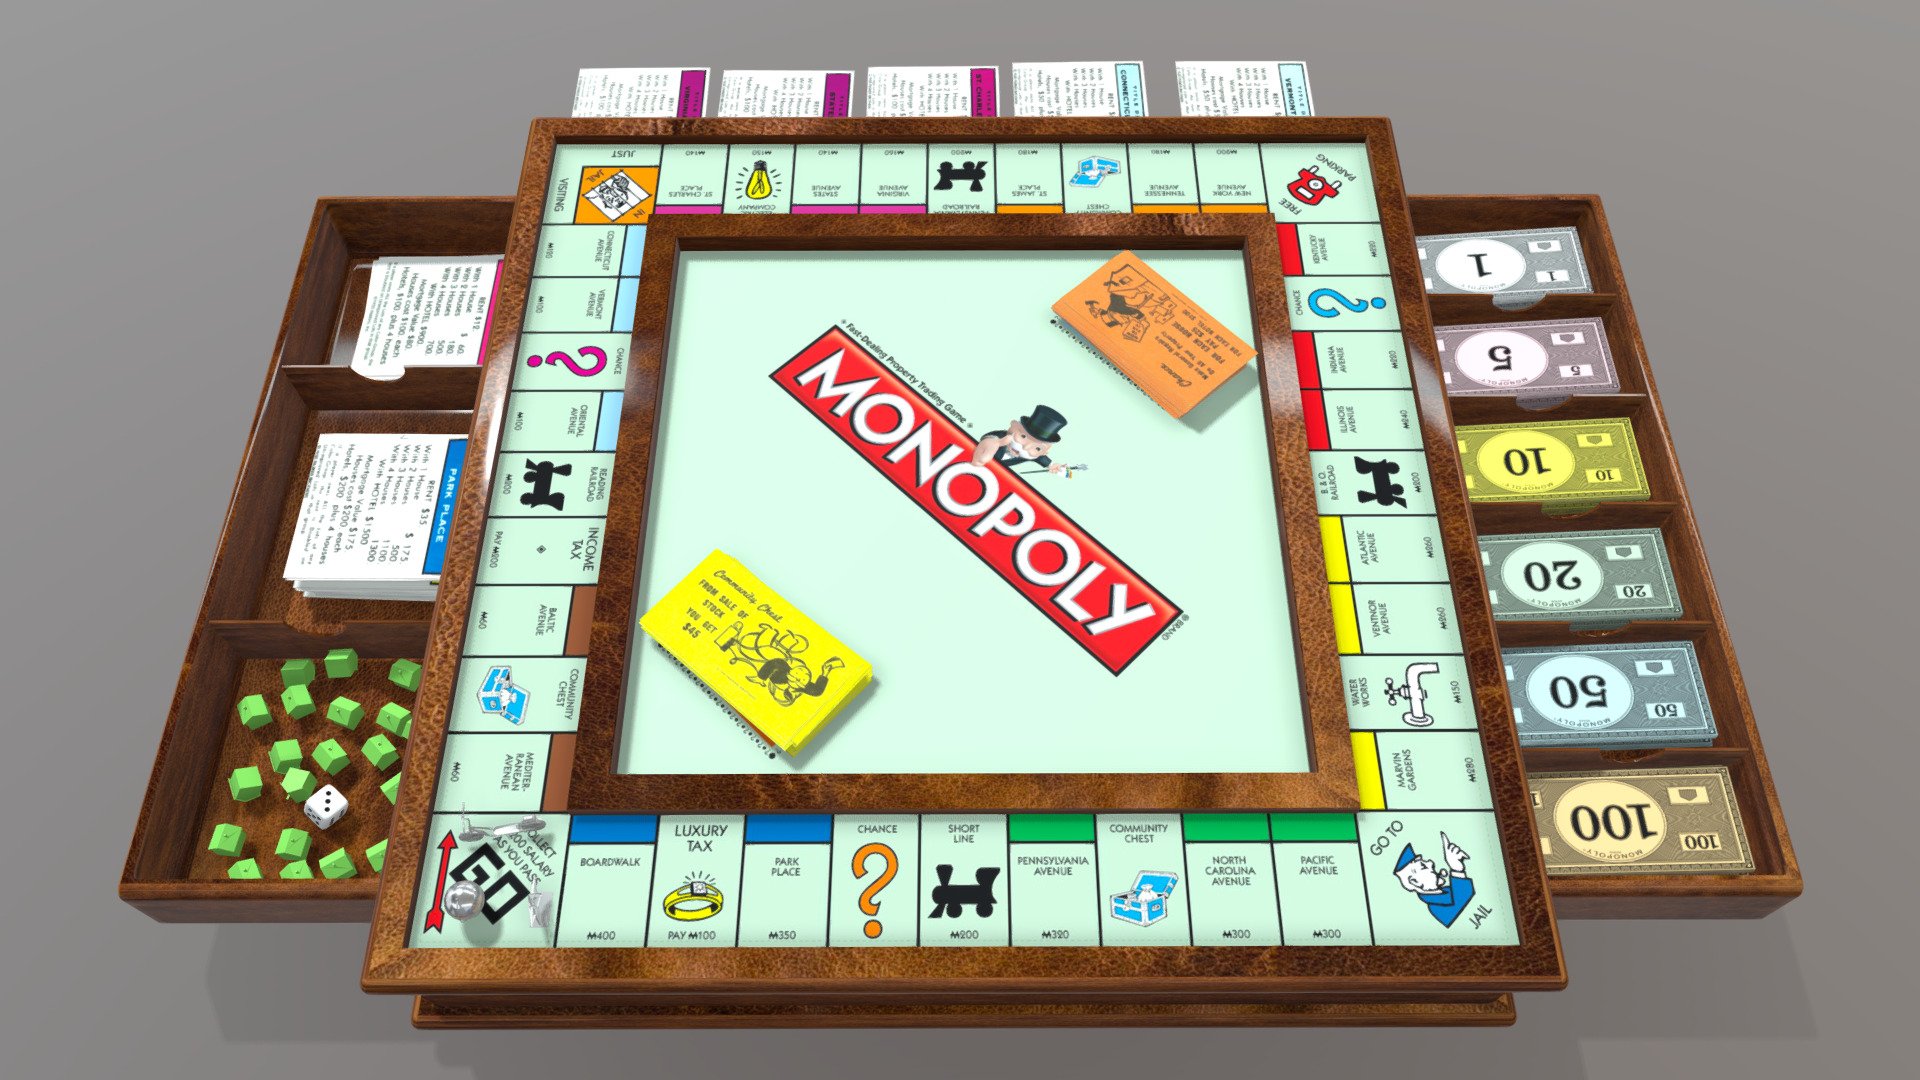 Classic Monopoly V2




22 cards (streets) with 8 different group colors

4 cards (railways)

2 cards (public companies)

houses

16 cards (chance)

16 cards (community chest)

40 cards (1$), 40 (5$), 40 (10$), 50 (20$), 30 (50$), 20 (100$), 20 (500$).

3 pieces 

2 drawer with all inside

1 dice
 - Classic Monopoly V2 - Buy Royalty Free 3D model by luismi93 3d model